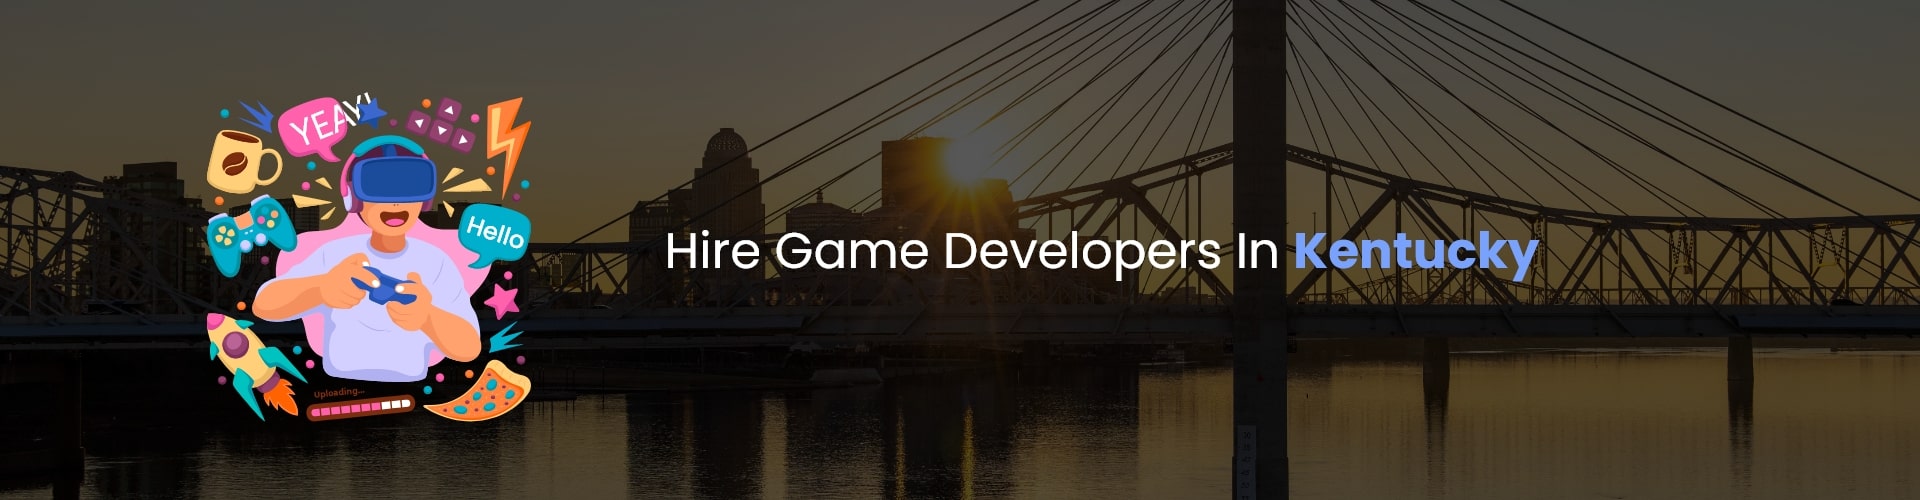 hire game developers in kentucky